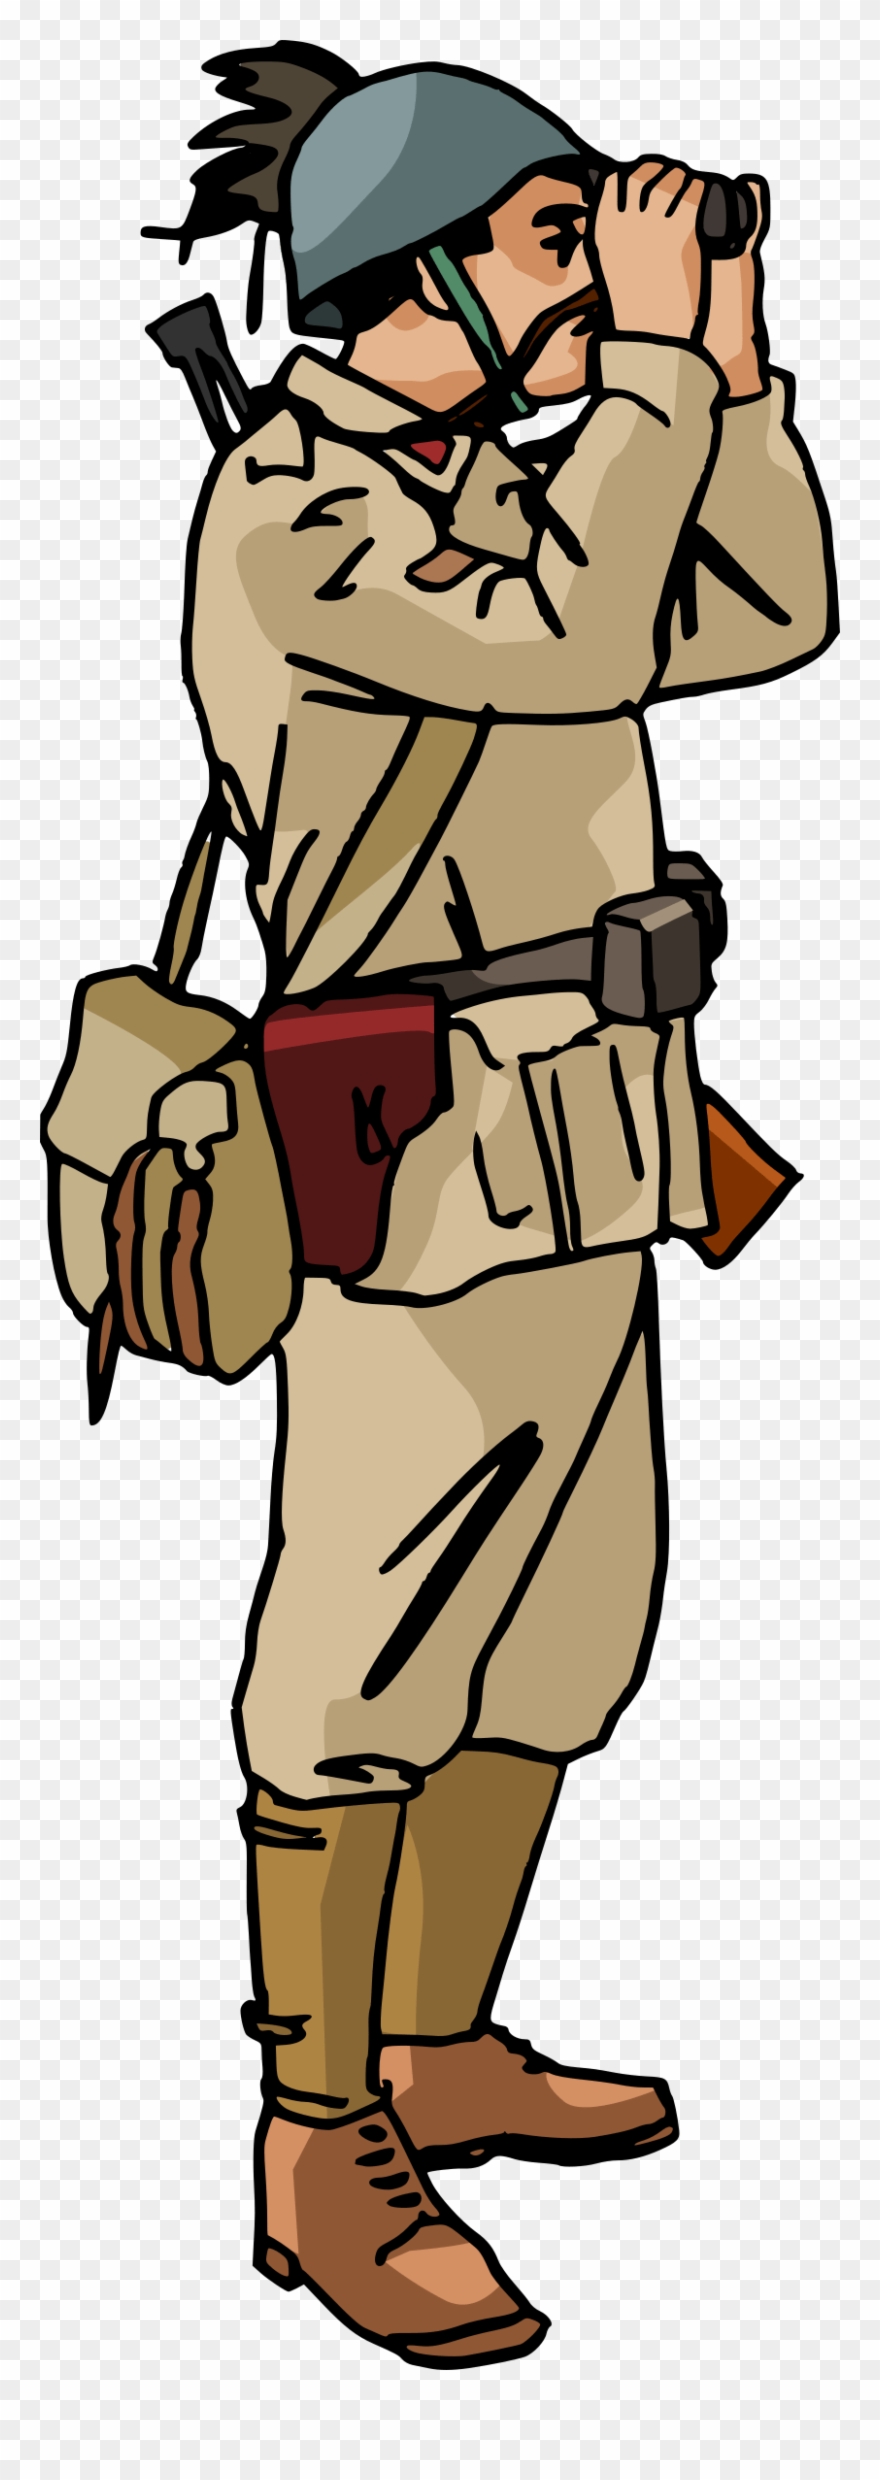 Soldier Clipart Ww2 Soldier Pencil And In Color Soldier.